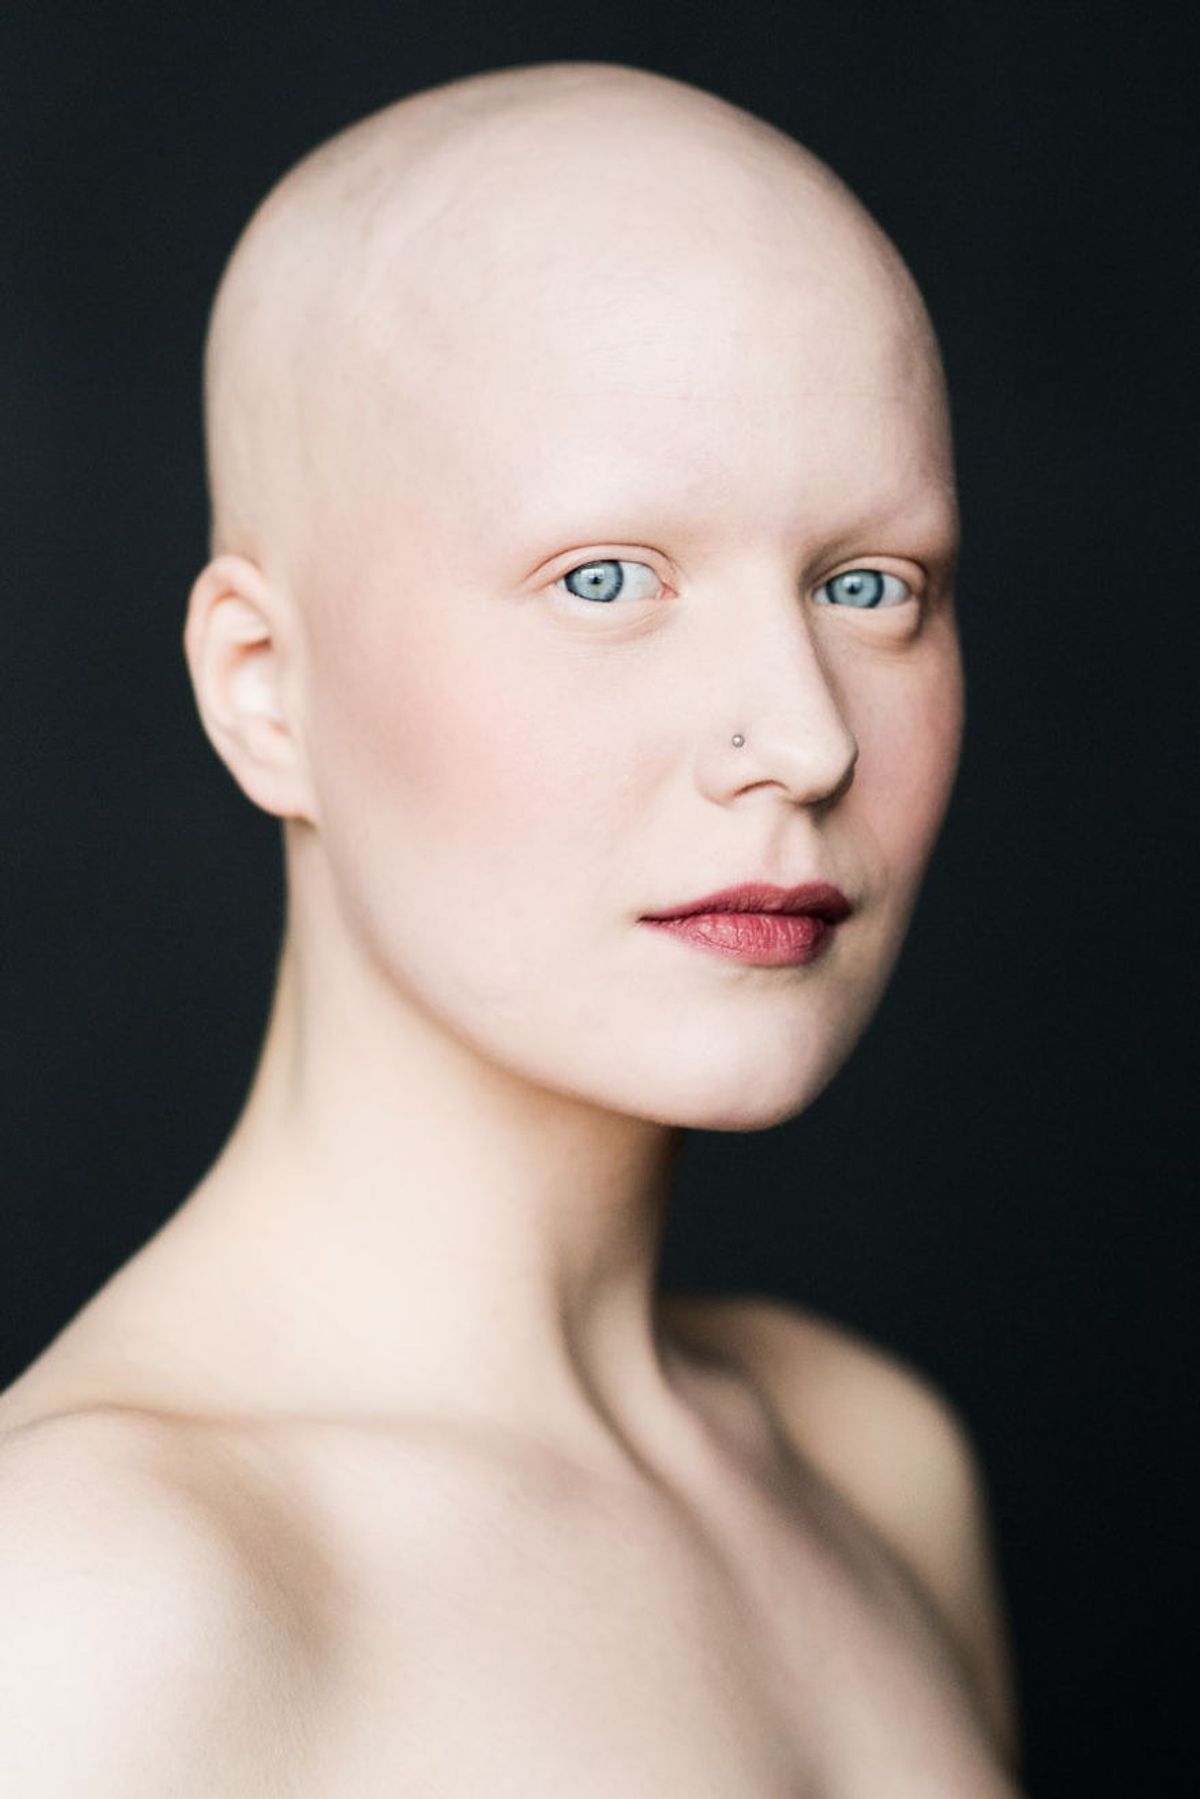 5 Things Someone With Alopecia Want You to Know